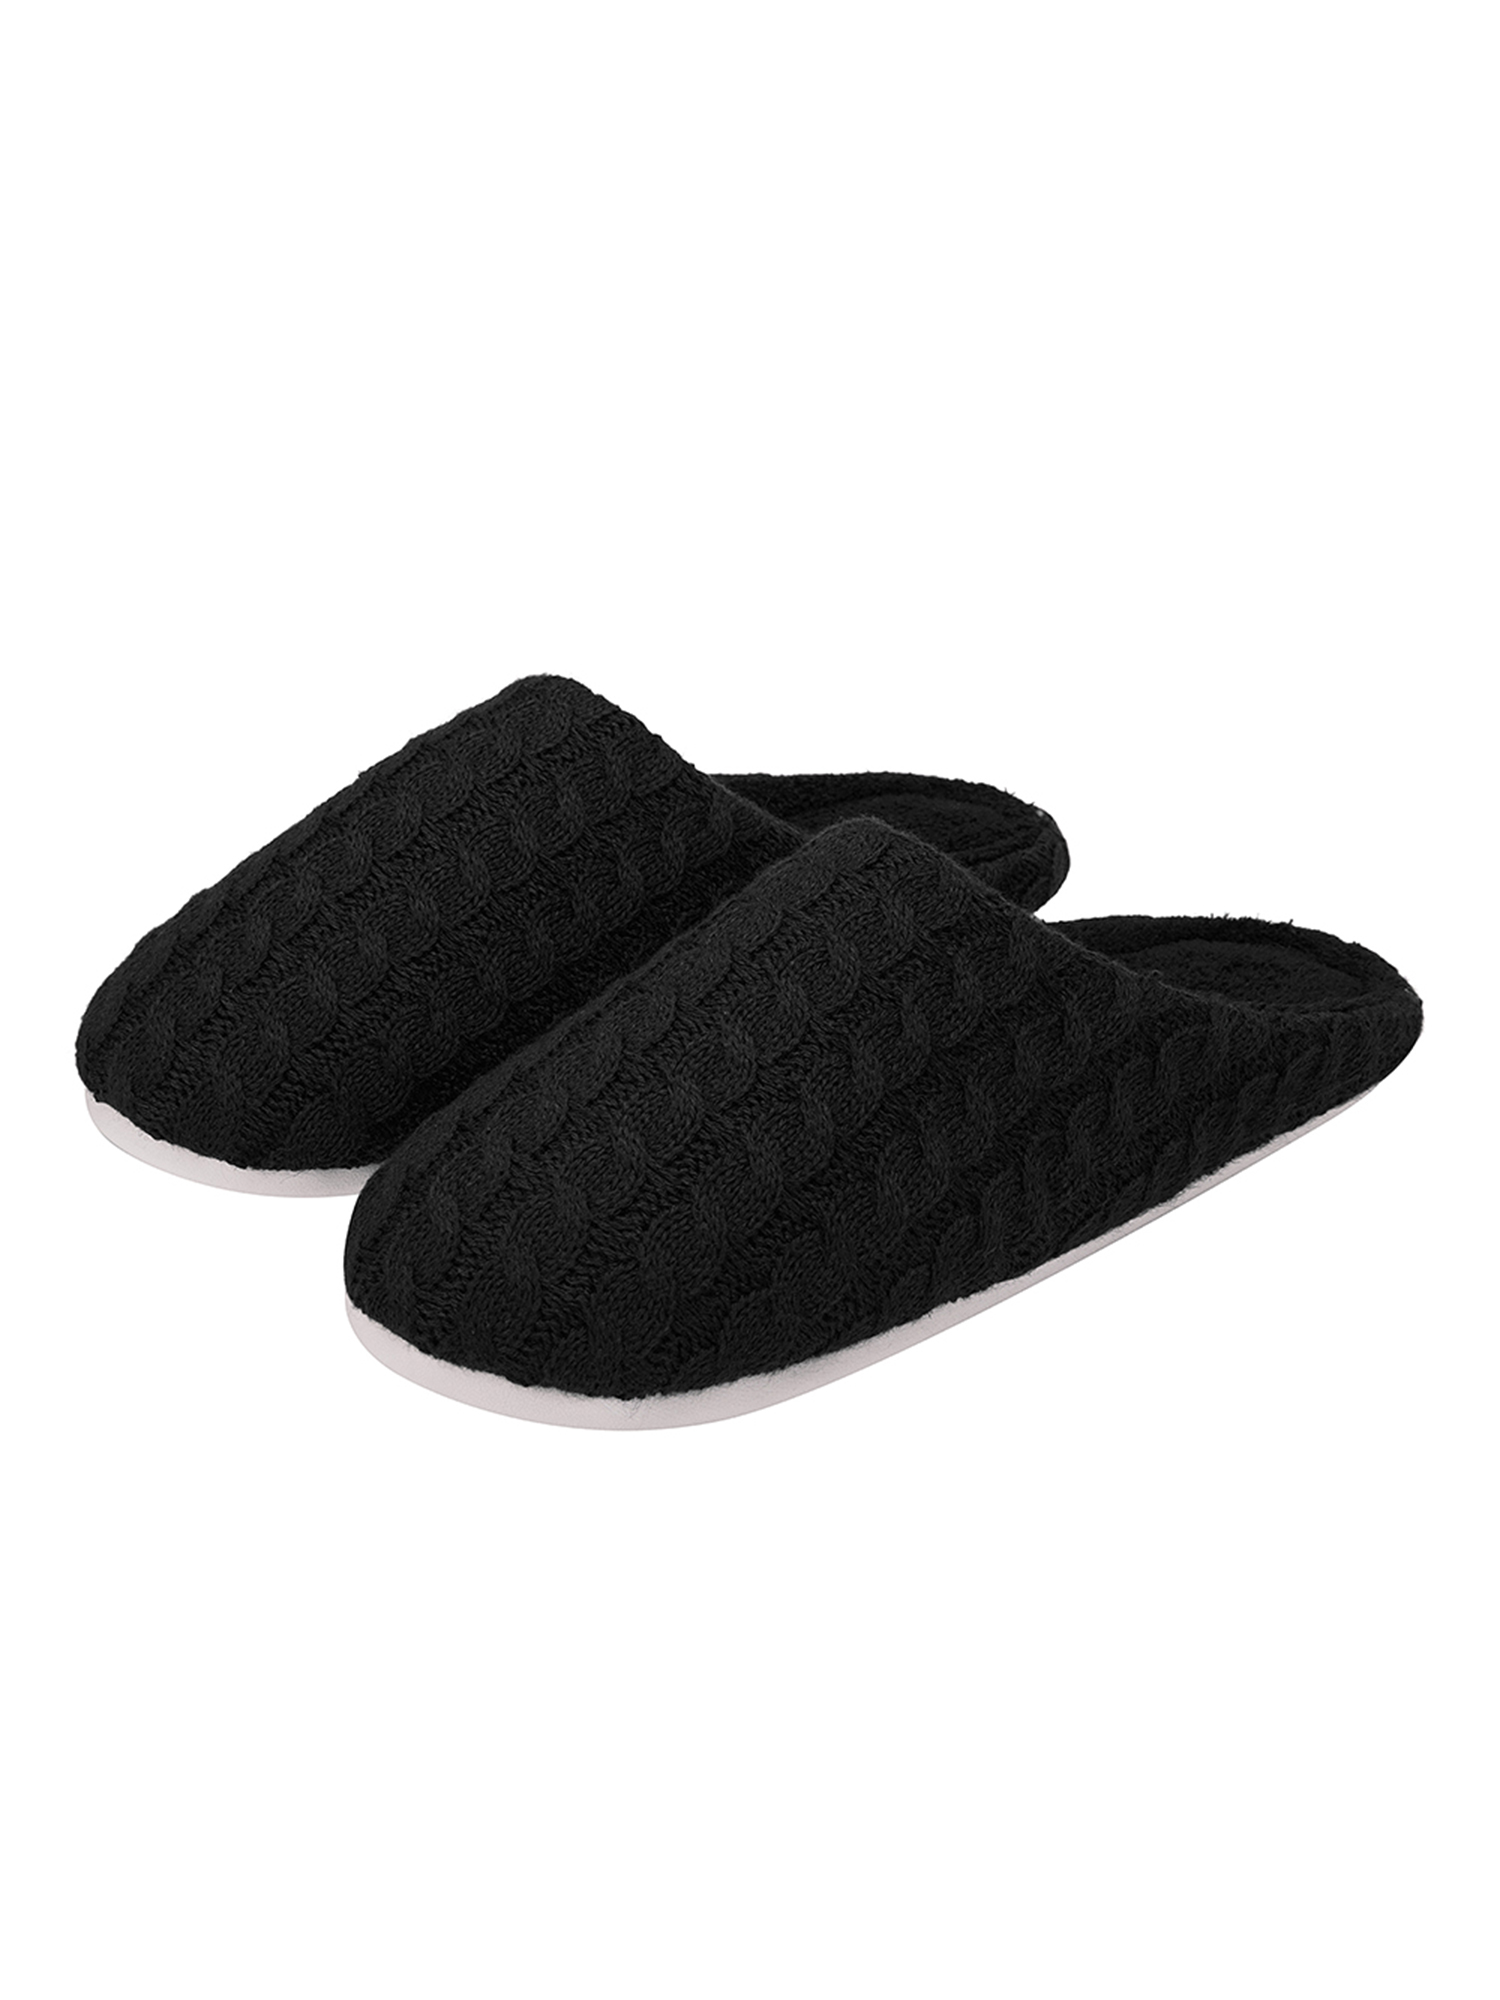 SAYFUT Men's and Women's Memory Foam House Slippers Soft Sole Cotton Comfortable Indoor Slid Slippers Slip Ons Mens Slide Slippers Shoes - image 1 of 8